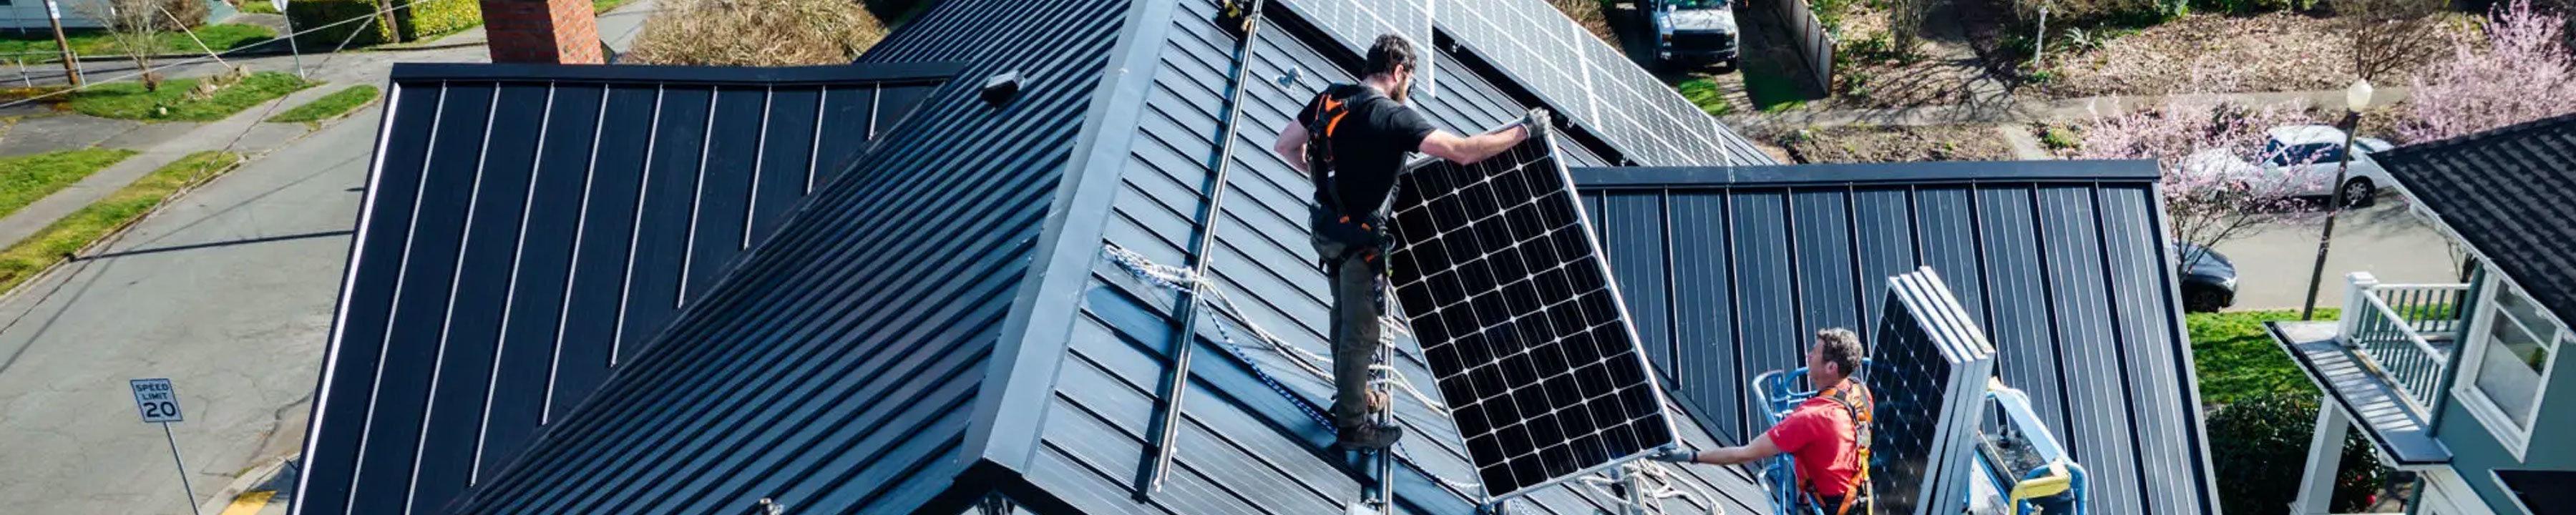 Professional workers installing solar panels on a roof of a house